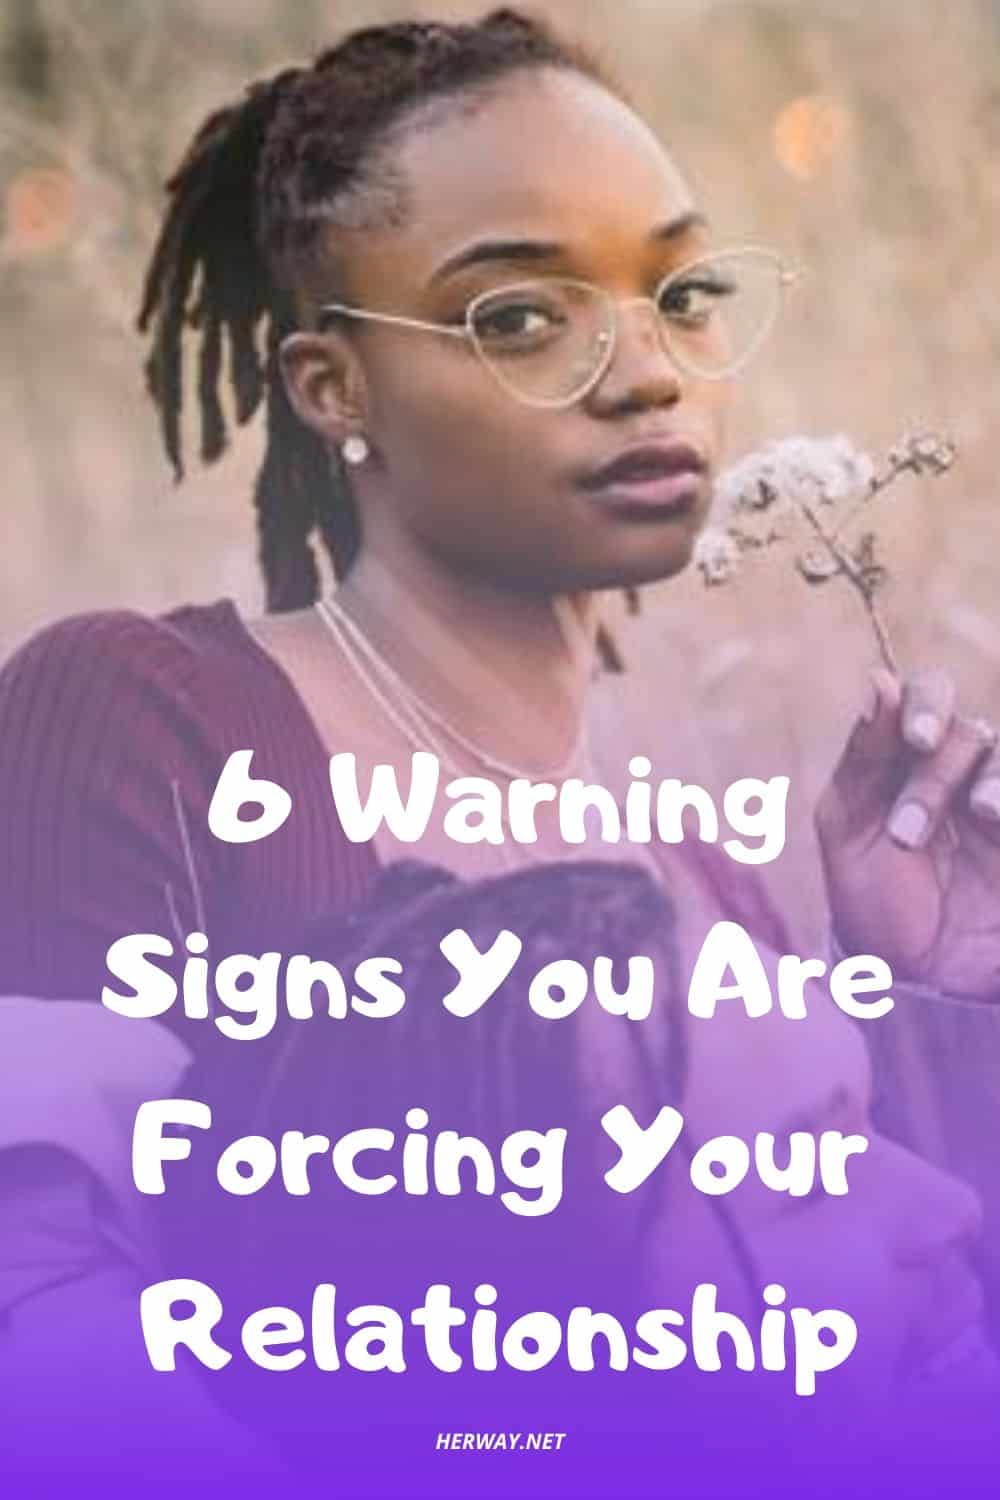 6 Warning Signs You Are Forcing Your Relationship